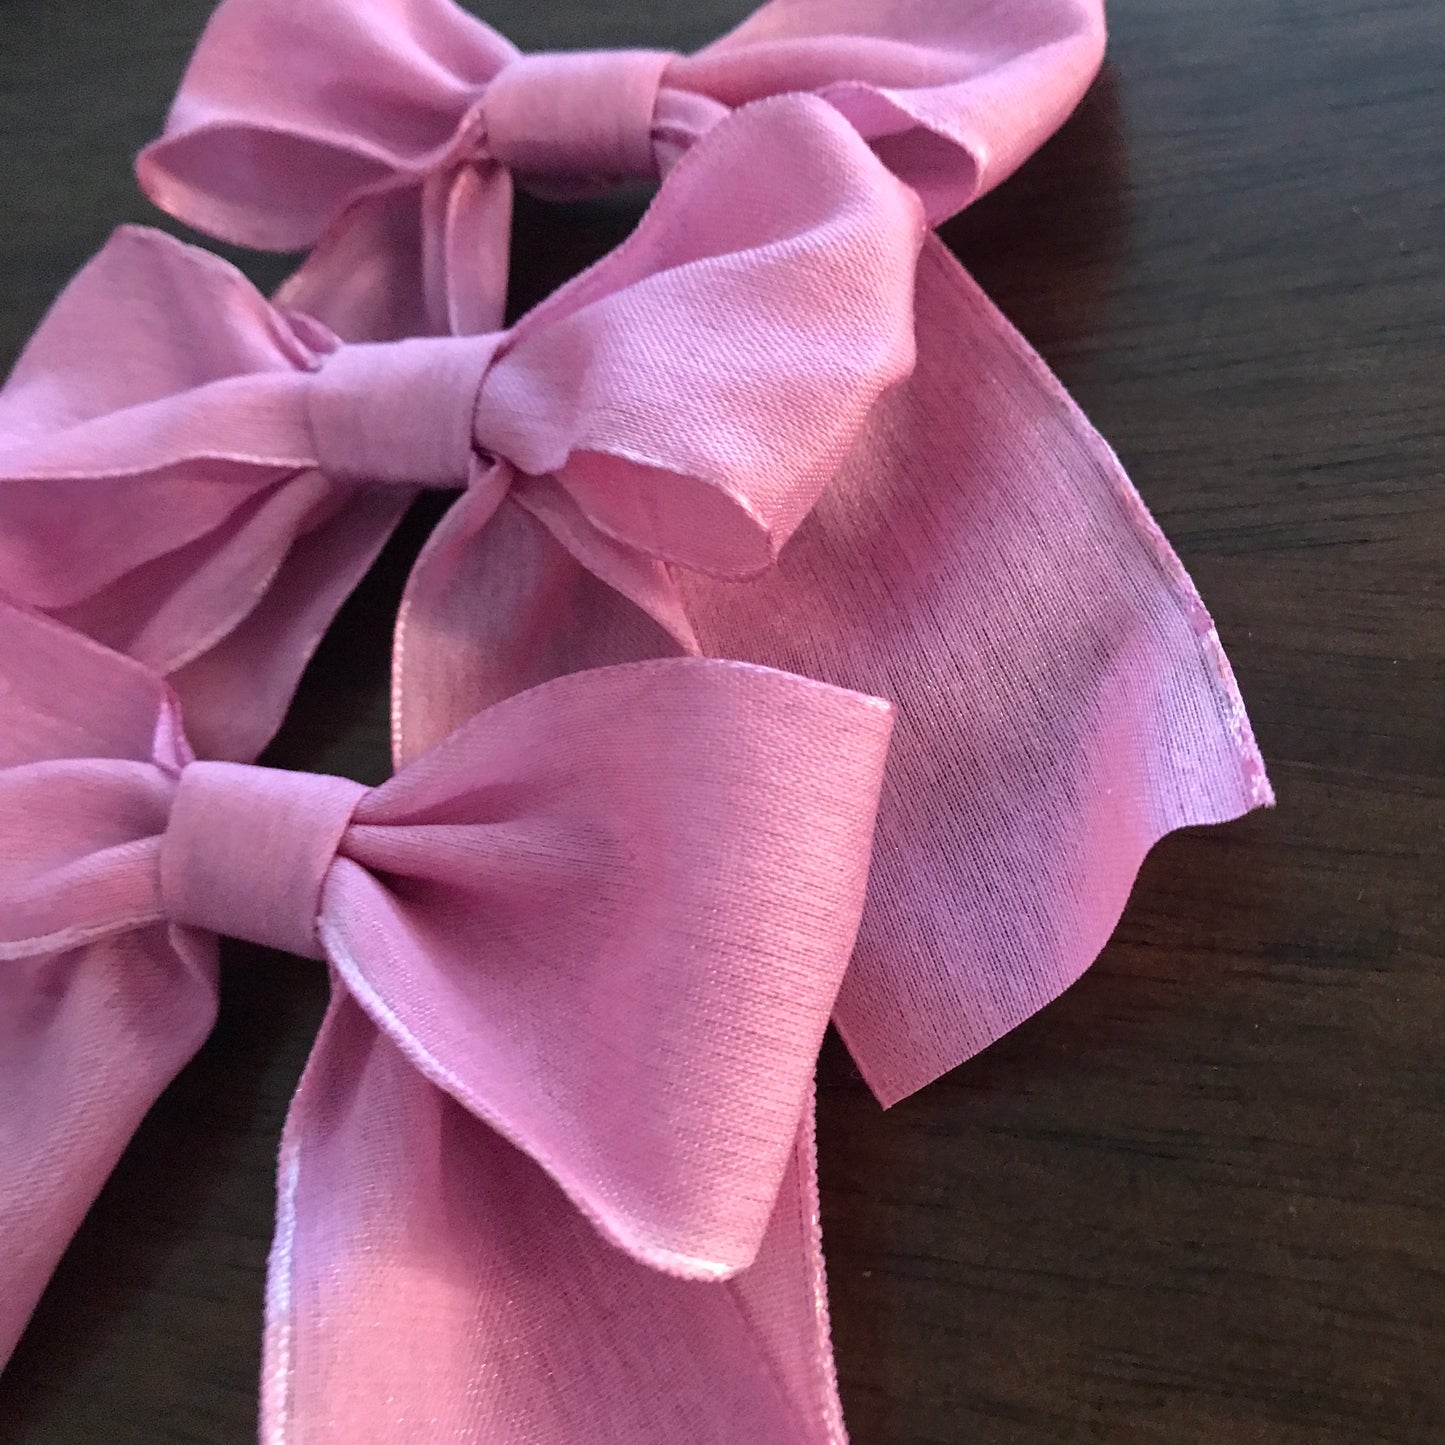 Handmade Hand-Crafted Lavender Pink Bows 3pcs